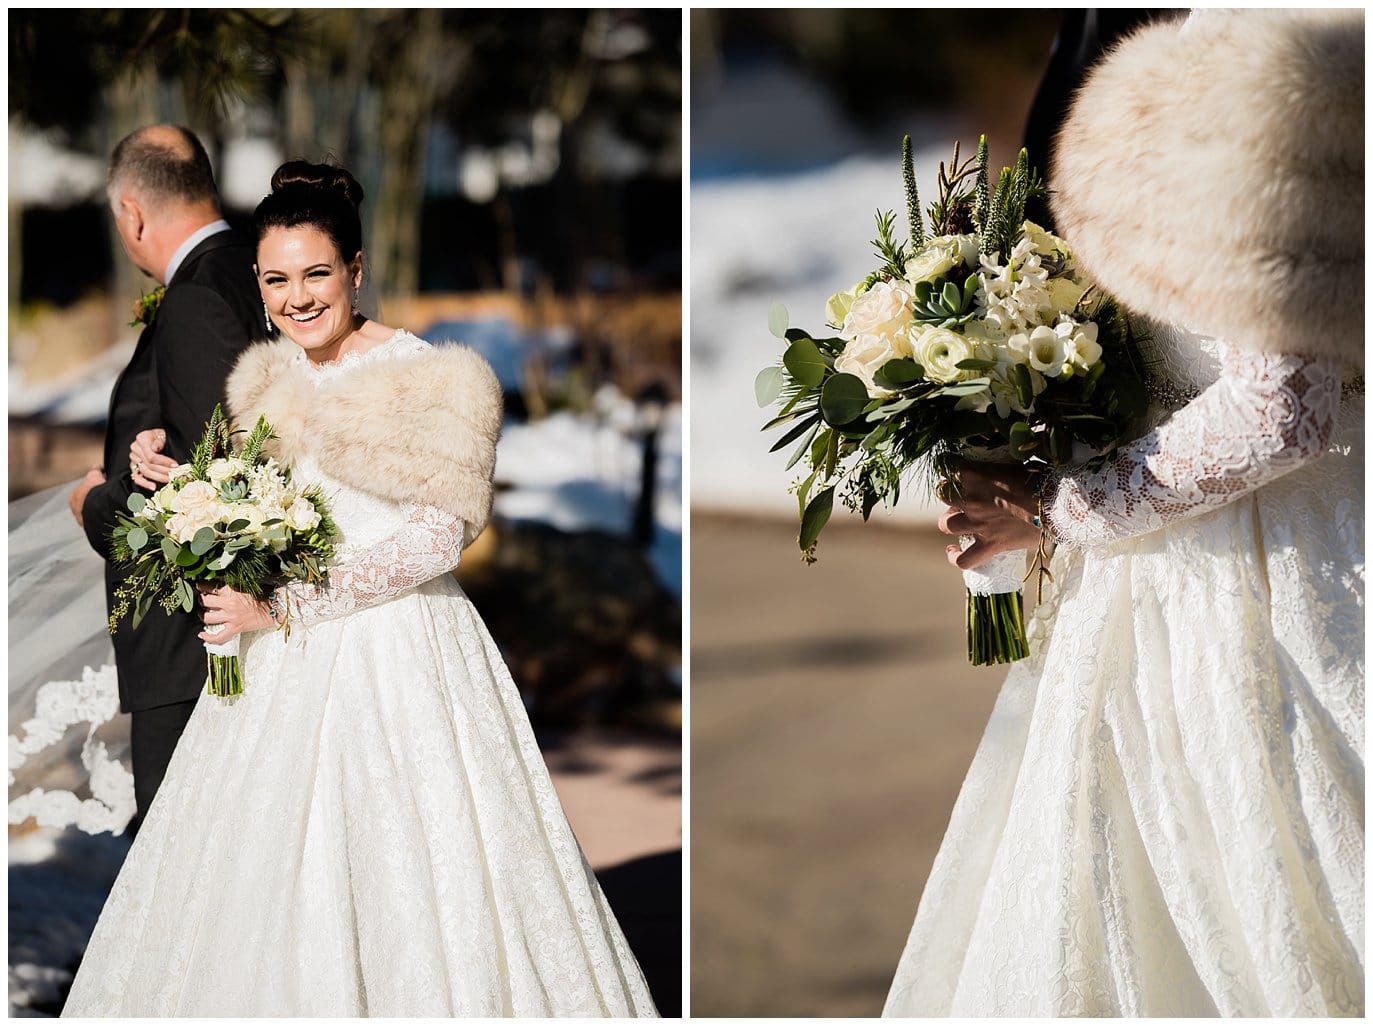 bride in log sleeved lace dress with white fur photo